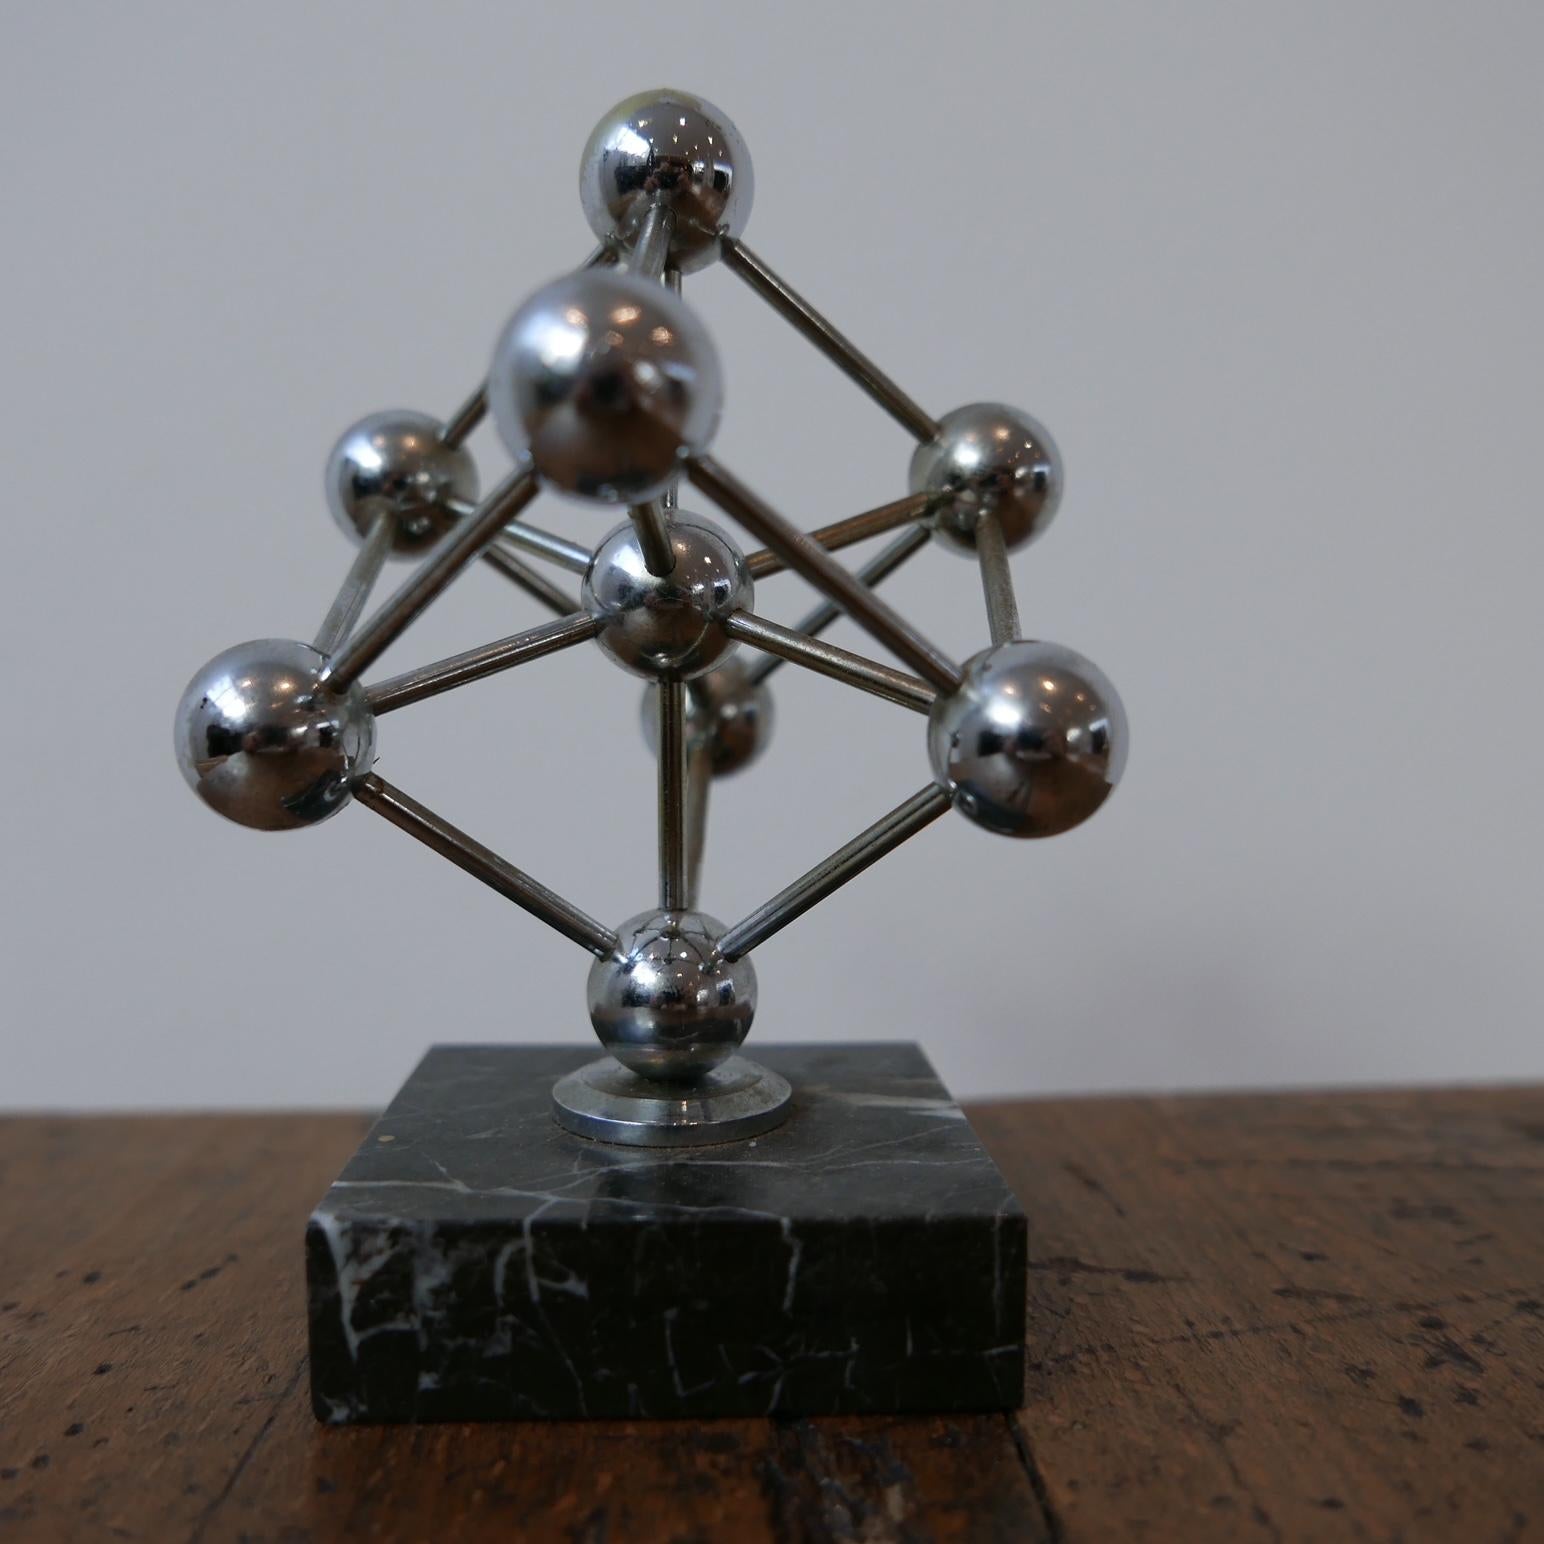 A small desk top model of the Atomium building in Brussels.

Marble base, metal model.

Belgium, c1960s.

Some small nicks and scuffs, wear commensurate with age.

Location: London Gallery.

Dimensions: 12 H x 8.5 W x 9.5 D in cm.

Delivery: POA

We